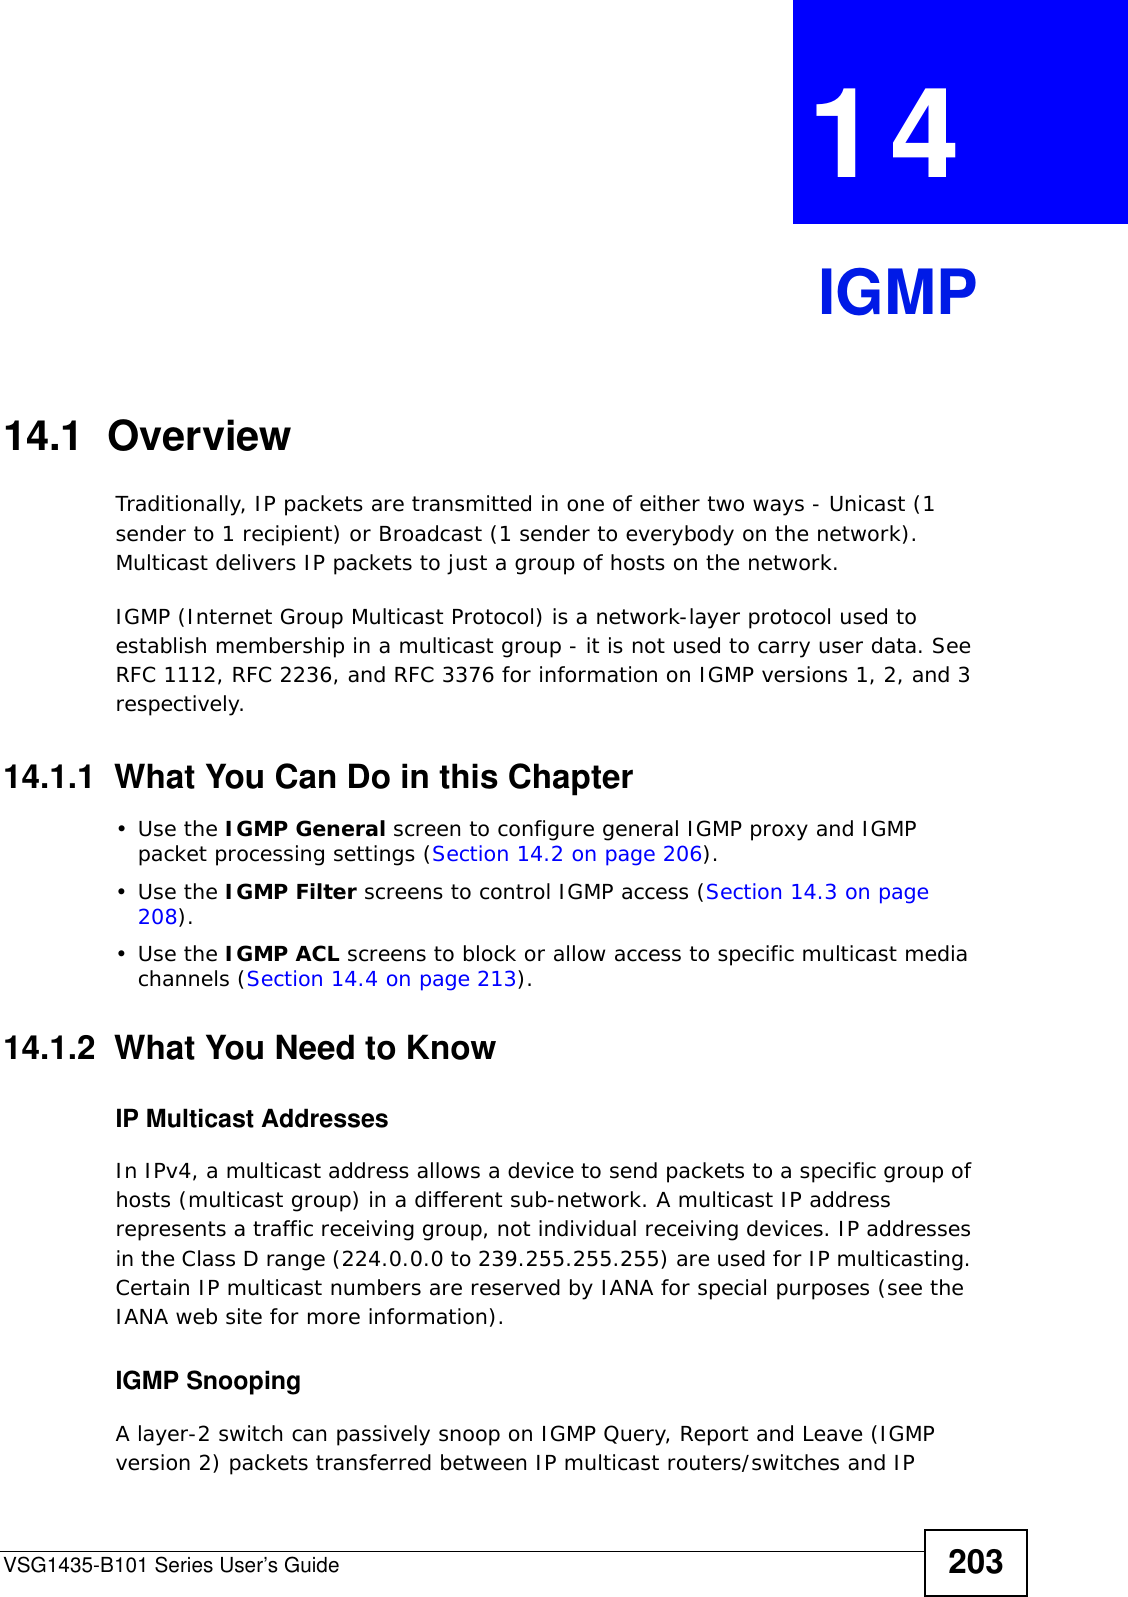 VSG1435-B101 Series User’s Guide 203CHAPTER  14 IGMP14.1  OverviewTraditionally, IP packets are transmitted in one of either two ways - Unicast (1 sender to 1 recipient) or Broadcast (1 sender to everybody on the network). Multicast delivers IP packets to just a group of hosts on the network.IGMP (Internet Group Multicast Protocol) is a network-layer protocol used to establish membership in a multicast group - it is not used to carry user data. See RFC 1112, RFC 2236, and RFC 3376 for information on IGMP versions 1, 2, and 3 respectively.14.1.1  What You Can Do in this Chapter•Use the IGMP General screen to configure general IGMP proxy and IGMP packet processing settings (Section 14.2 on page 206).•Use the IGMP Filter screens to control IGMP access (Section 14.3 on page 208). •Use the IGMP ACL screens to block or allow access to specific multicast media channels (Section 14.4 on page 213). 14.1.2  What You Need to KnowIP Multicast AddressesIn IPv4, a multicast address allows a device to send packets to a specific group of hosts (multicast group) in a different sub-network. A multicast IP address represents a traffic receiving group, not individual receiving devices. IP addresses in the Class D range (224.0.0.0 to 239.255.255.255) are used for IP multicasting. Certain IP multicast numbers are reserved by IANA for special purposes (see the IANA web site for more information).IGMP SnoopingA layer-2 switch can passively snoop on IGMP Query, Report and Leave (IGMP version 2) packets transferred between IP multicast routers/switches and IP 